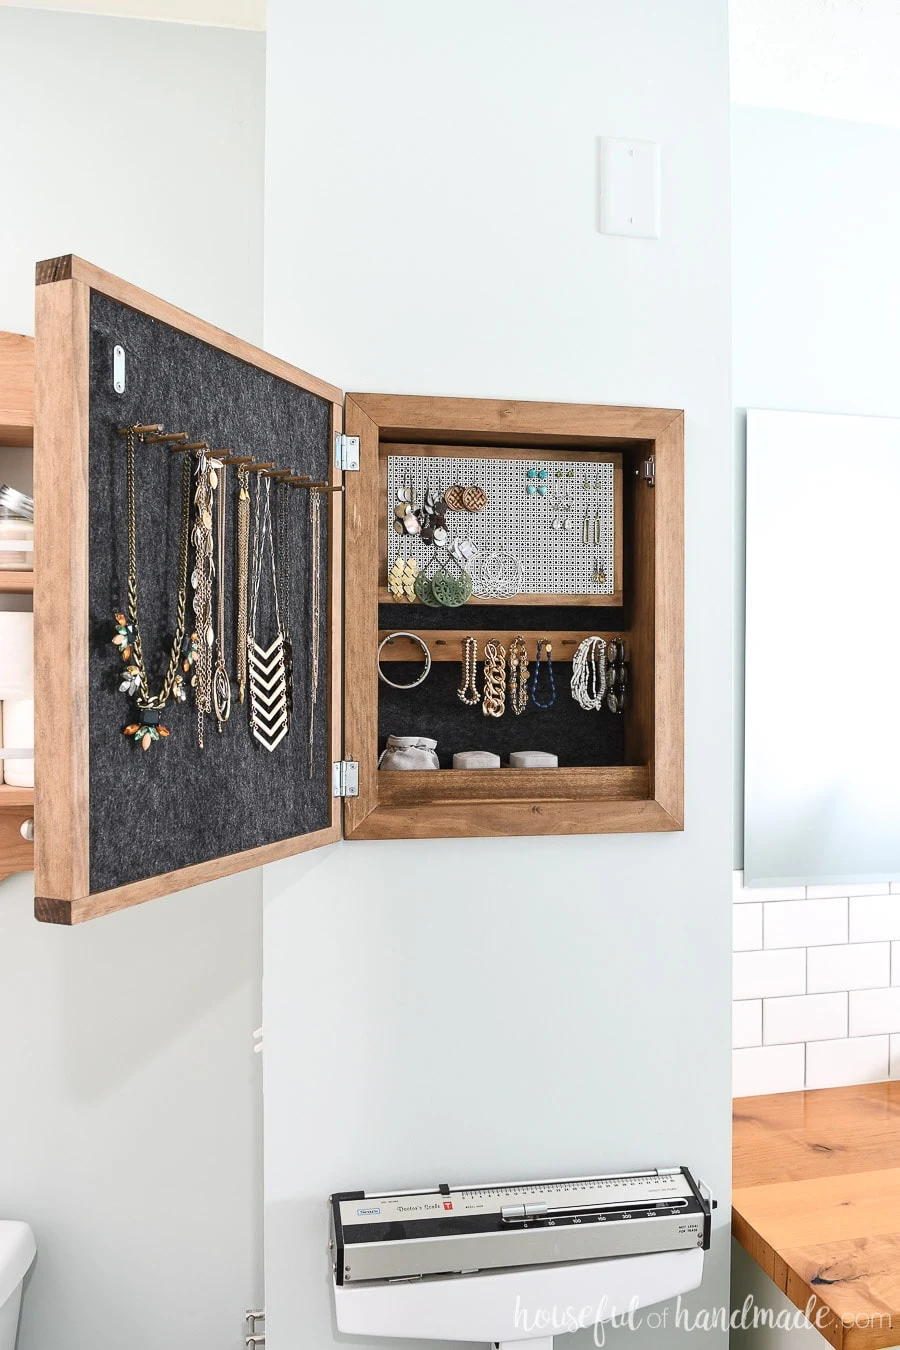 Wall jewelry organizer in the bathroom with storage for necklaces, earrings, bracelets and more.